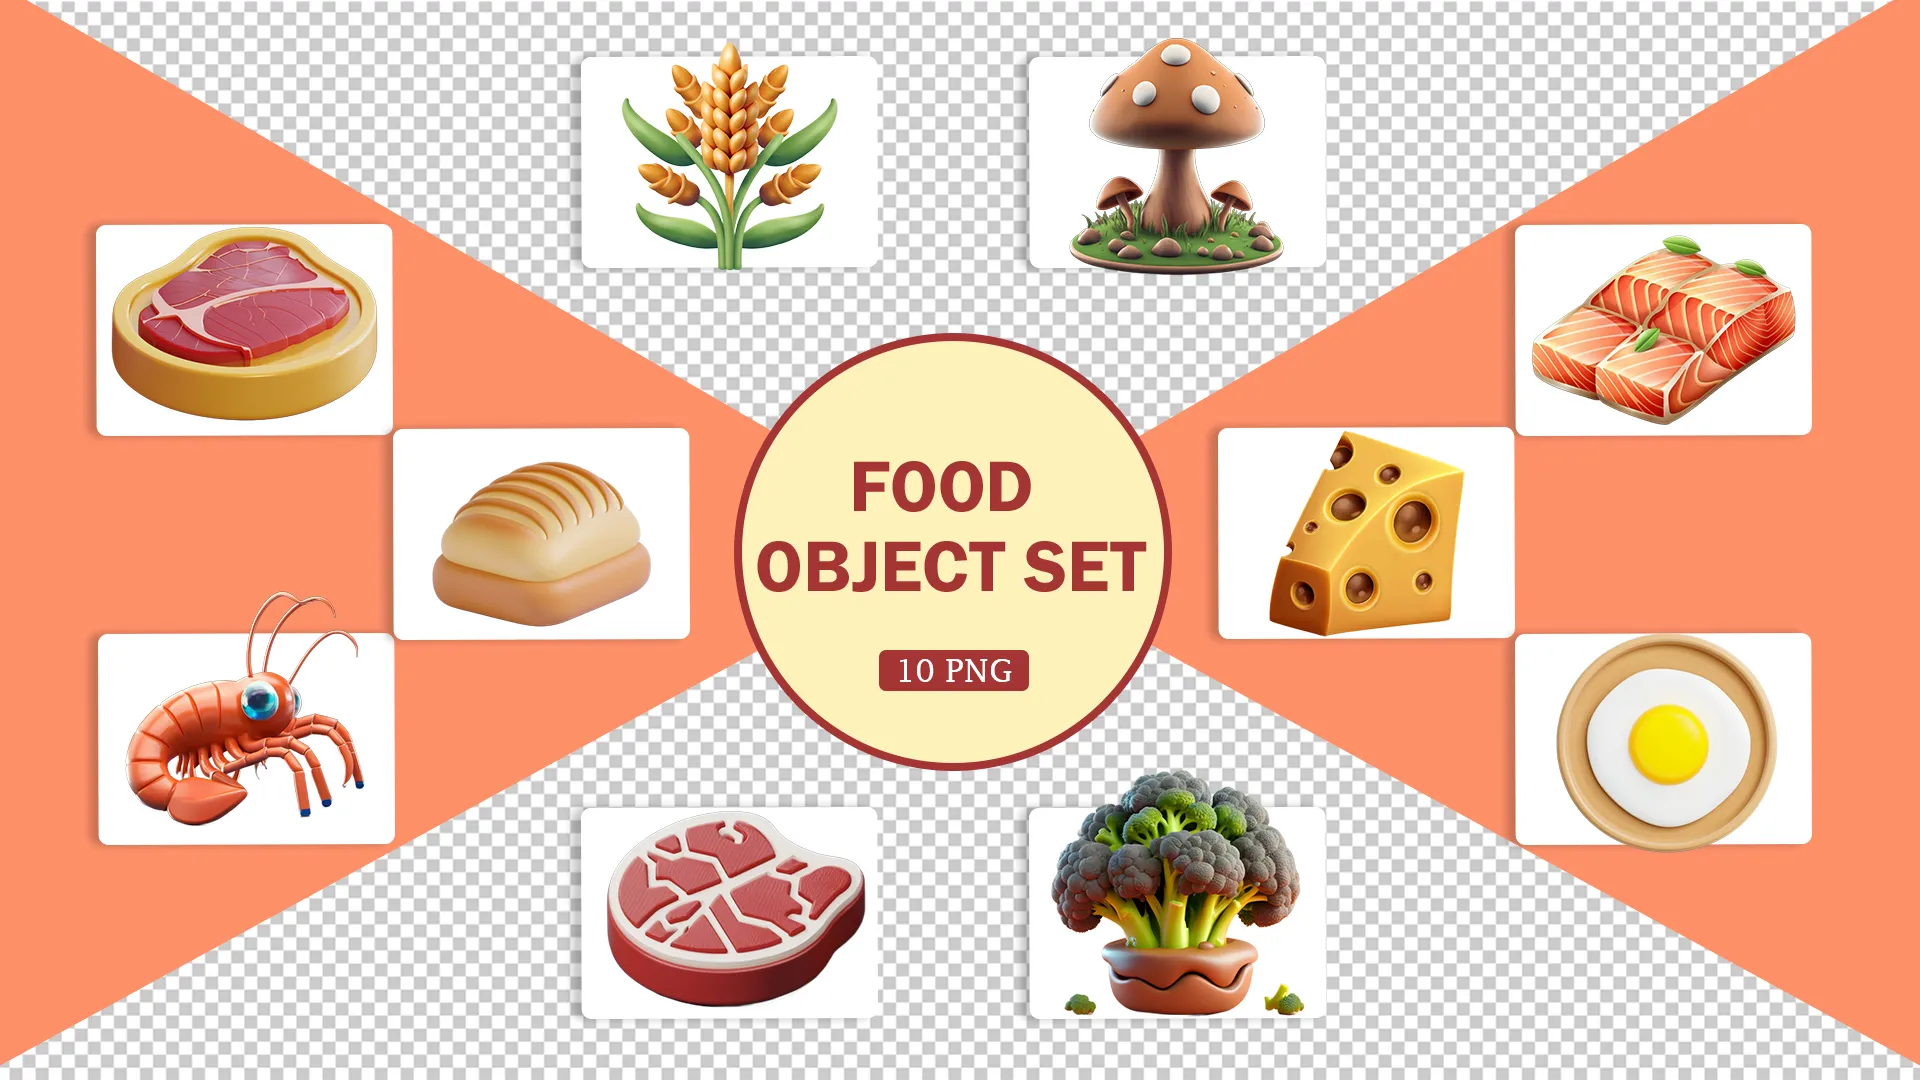 Bakery Fresh 3D Pack with Bread and Pastries